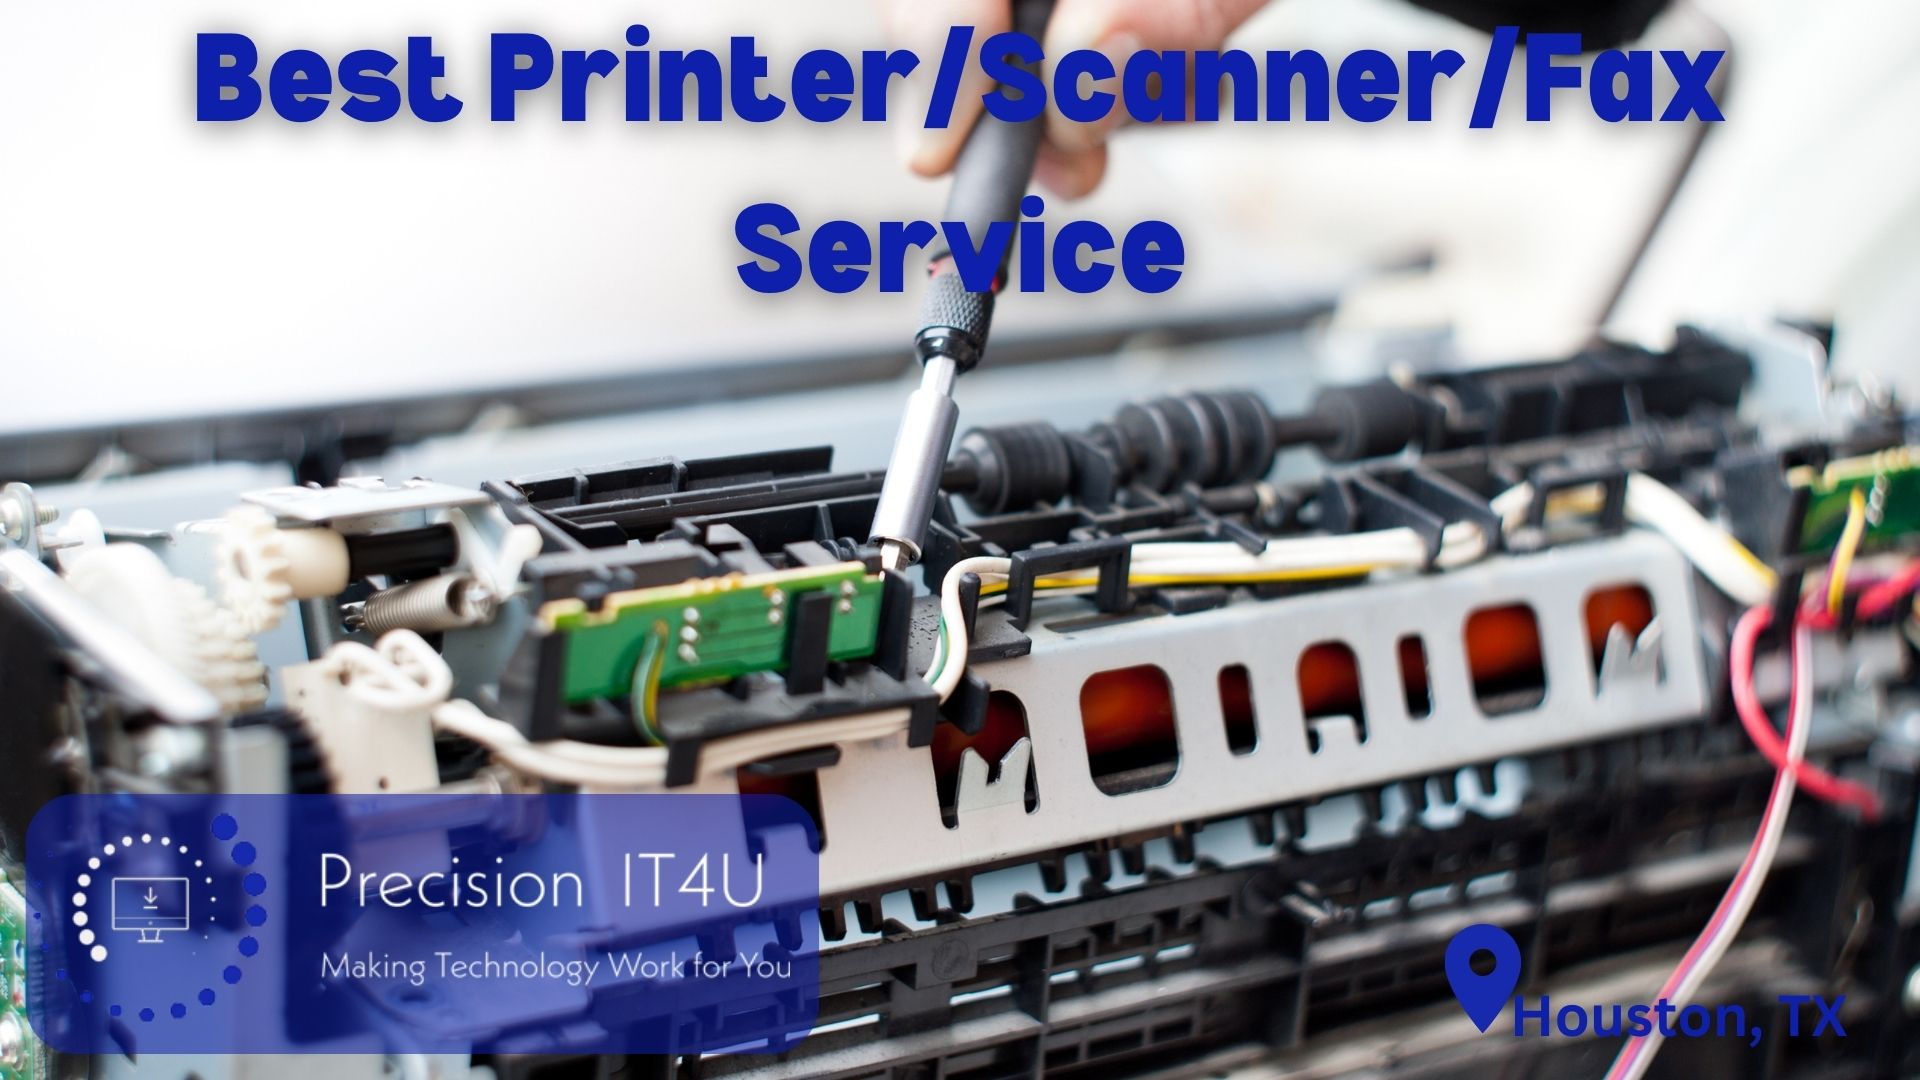 You are currently viewing Best Printer/Scanner/Fax Service In Houston, Texas